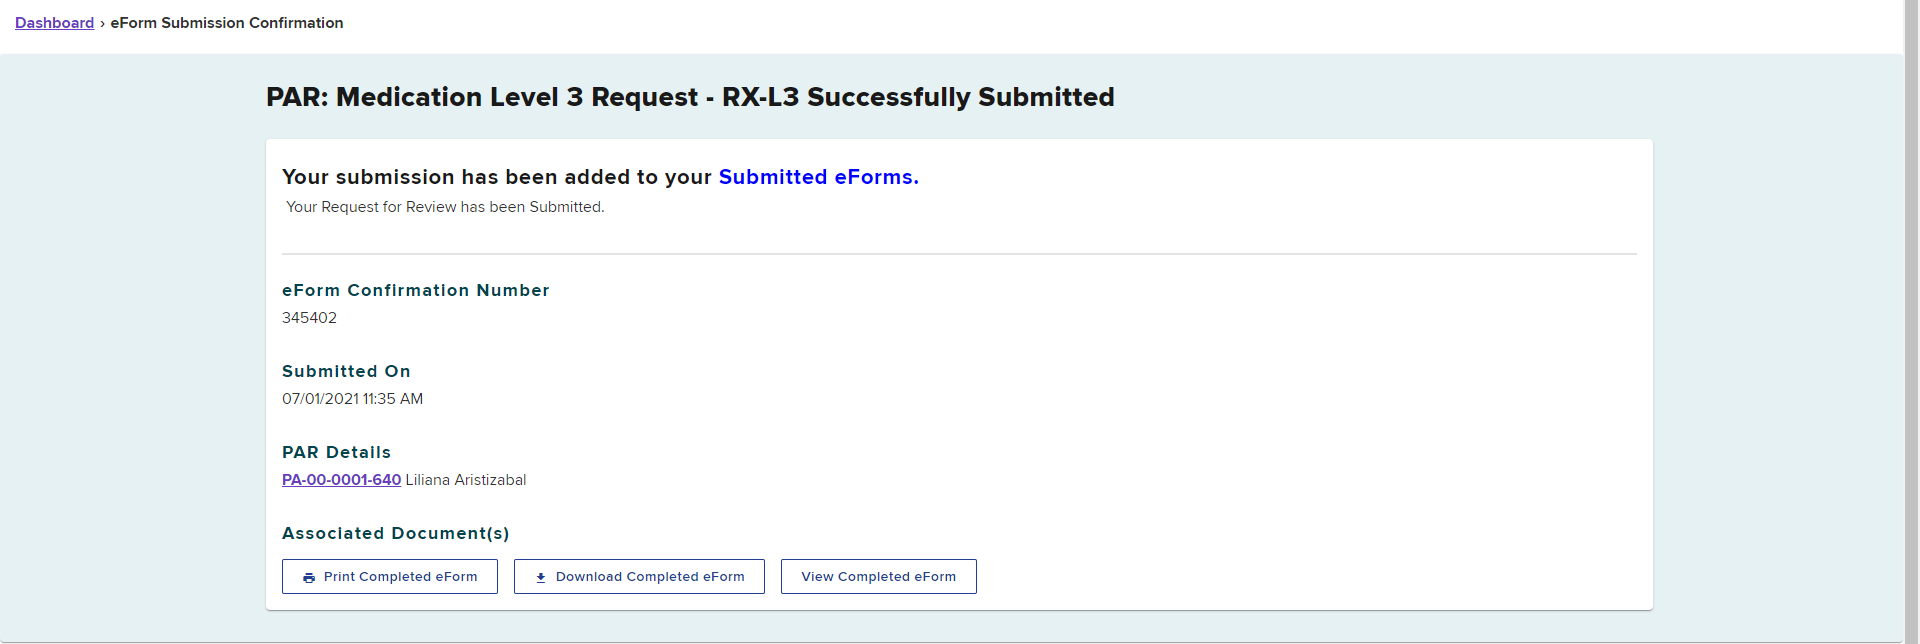 L3 Request Successfully Submitted